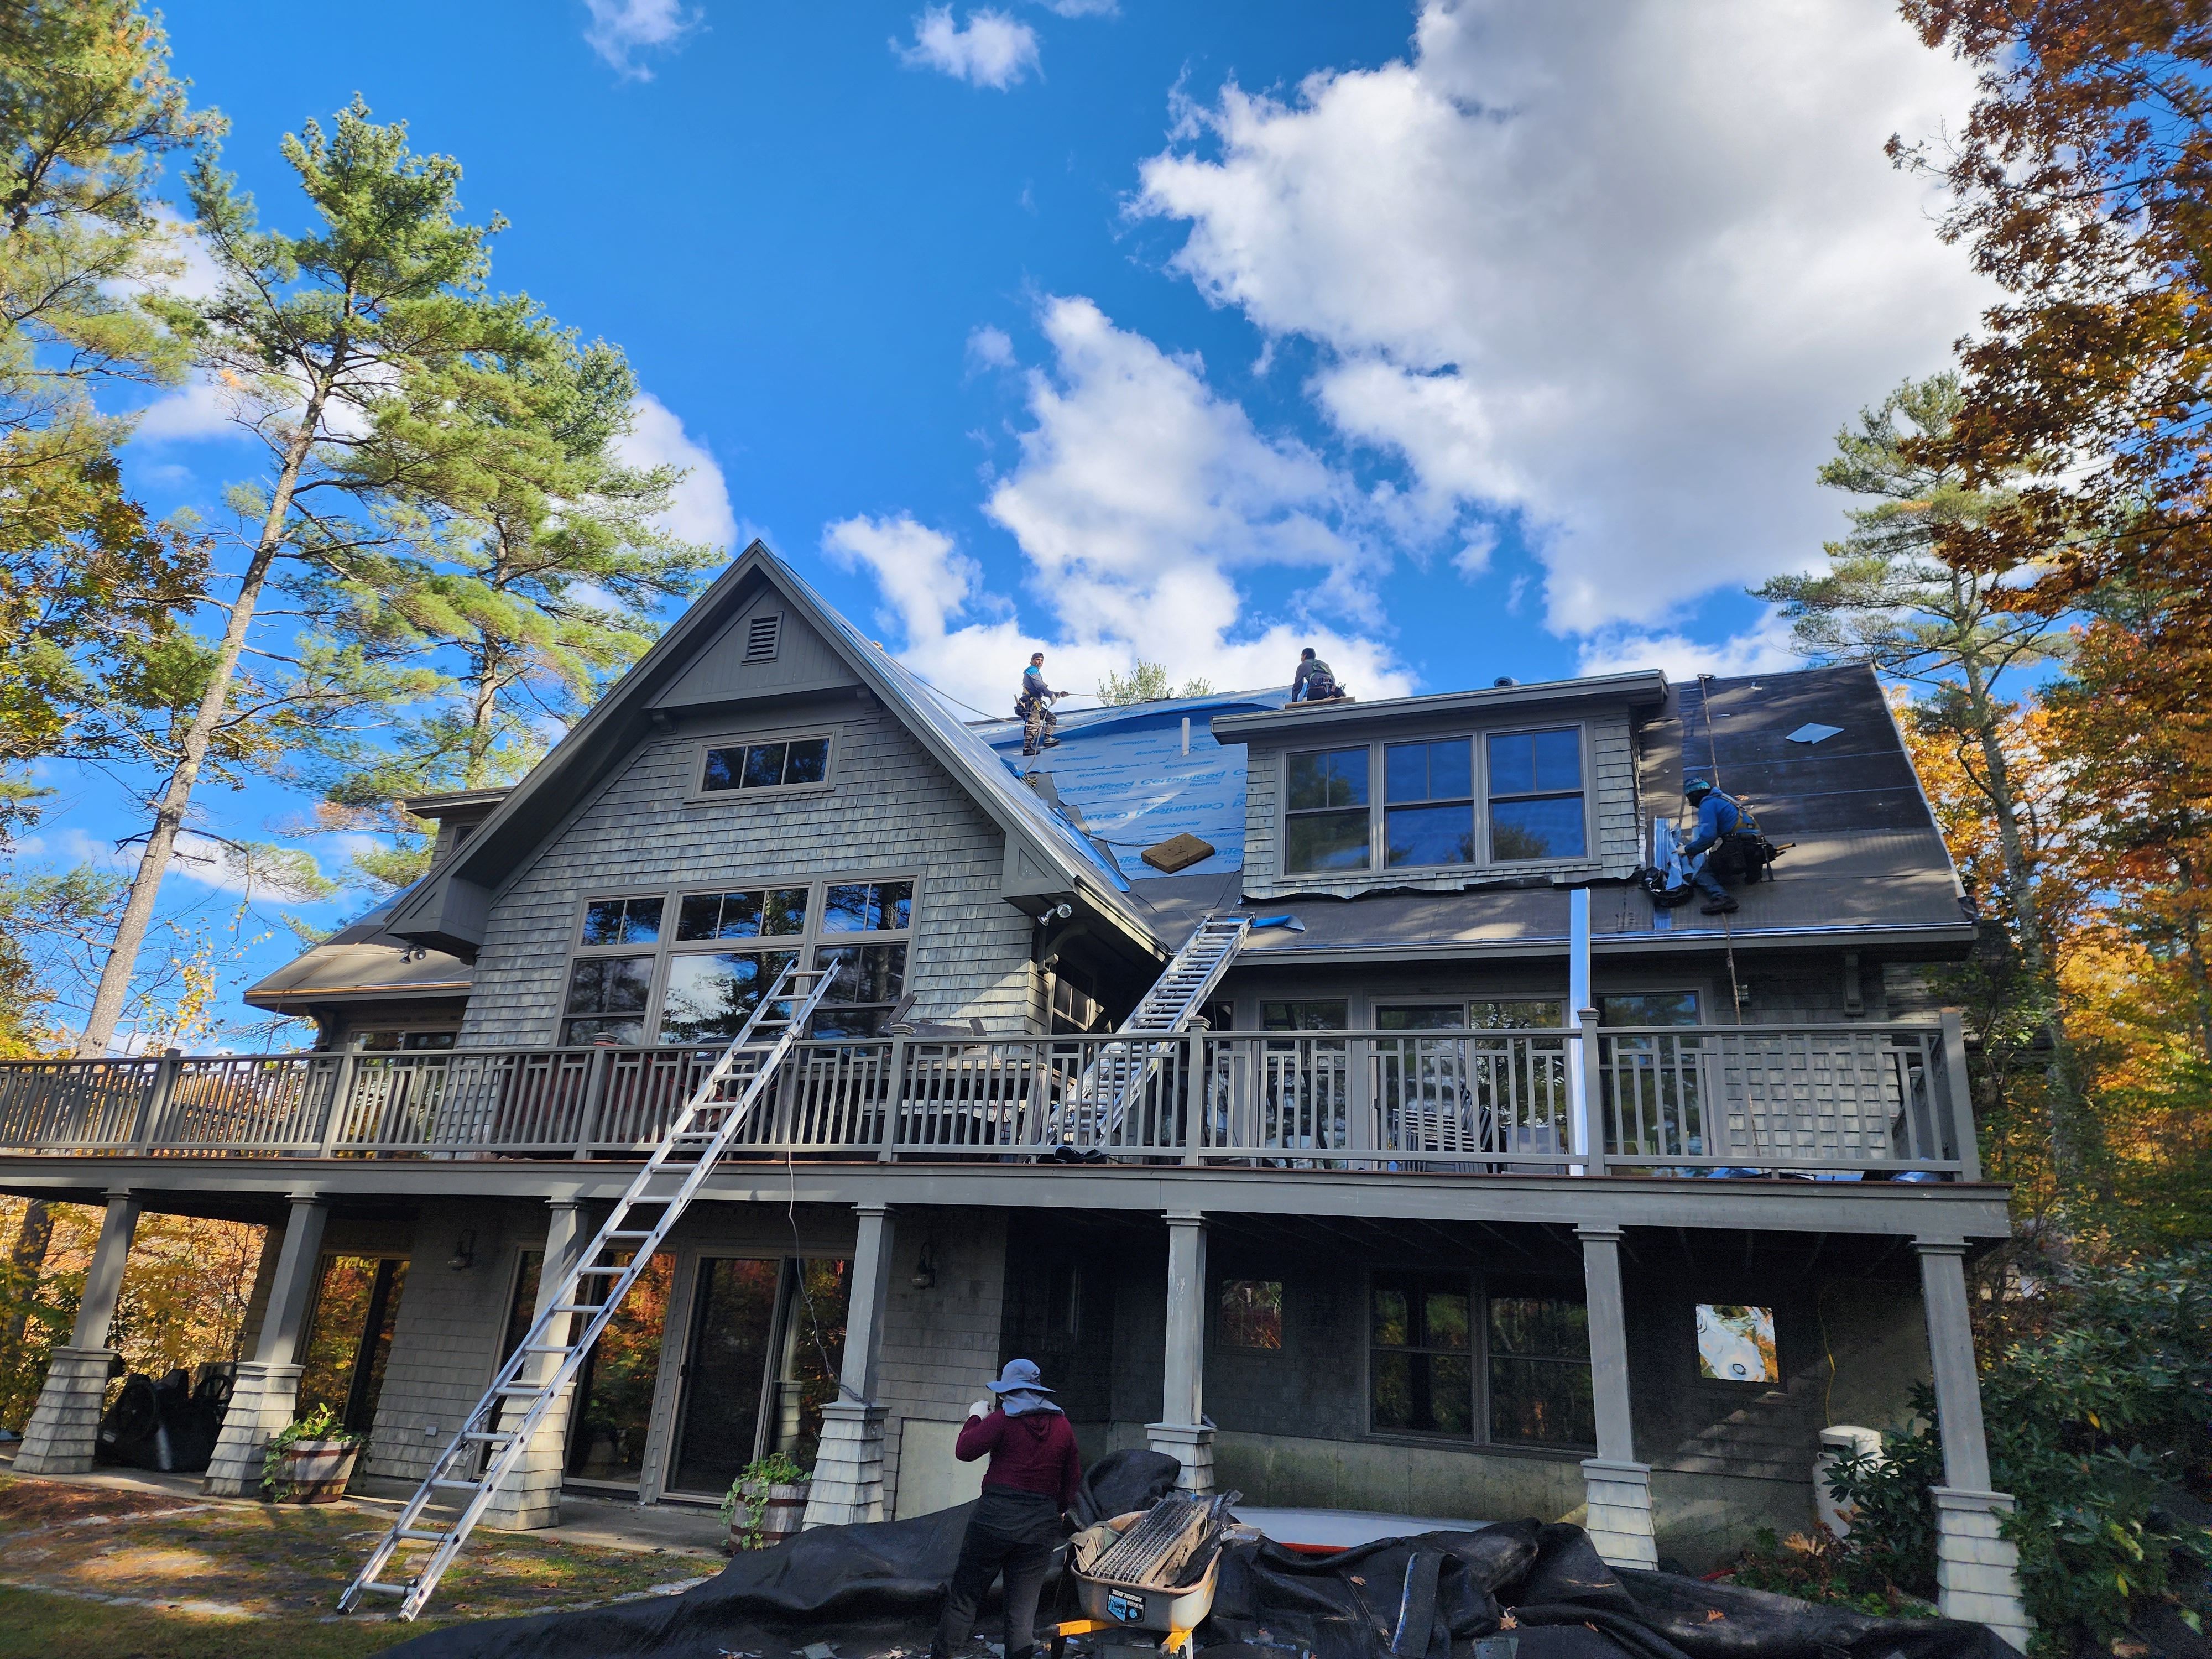 All Photos for Jalbert Contracting LLC in Alton, NH